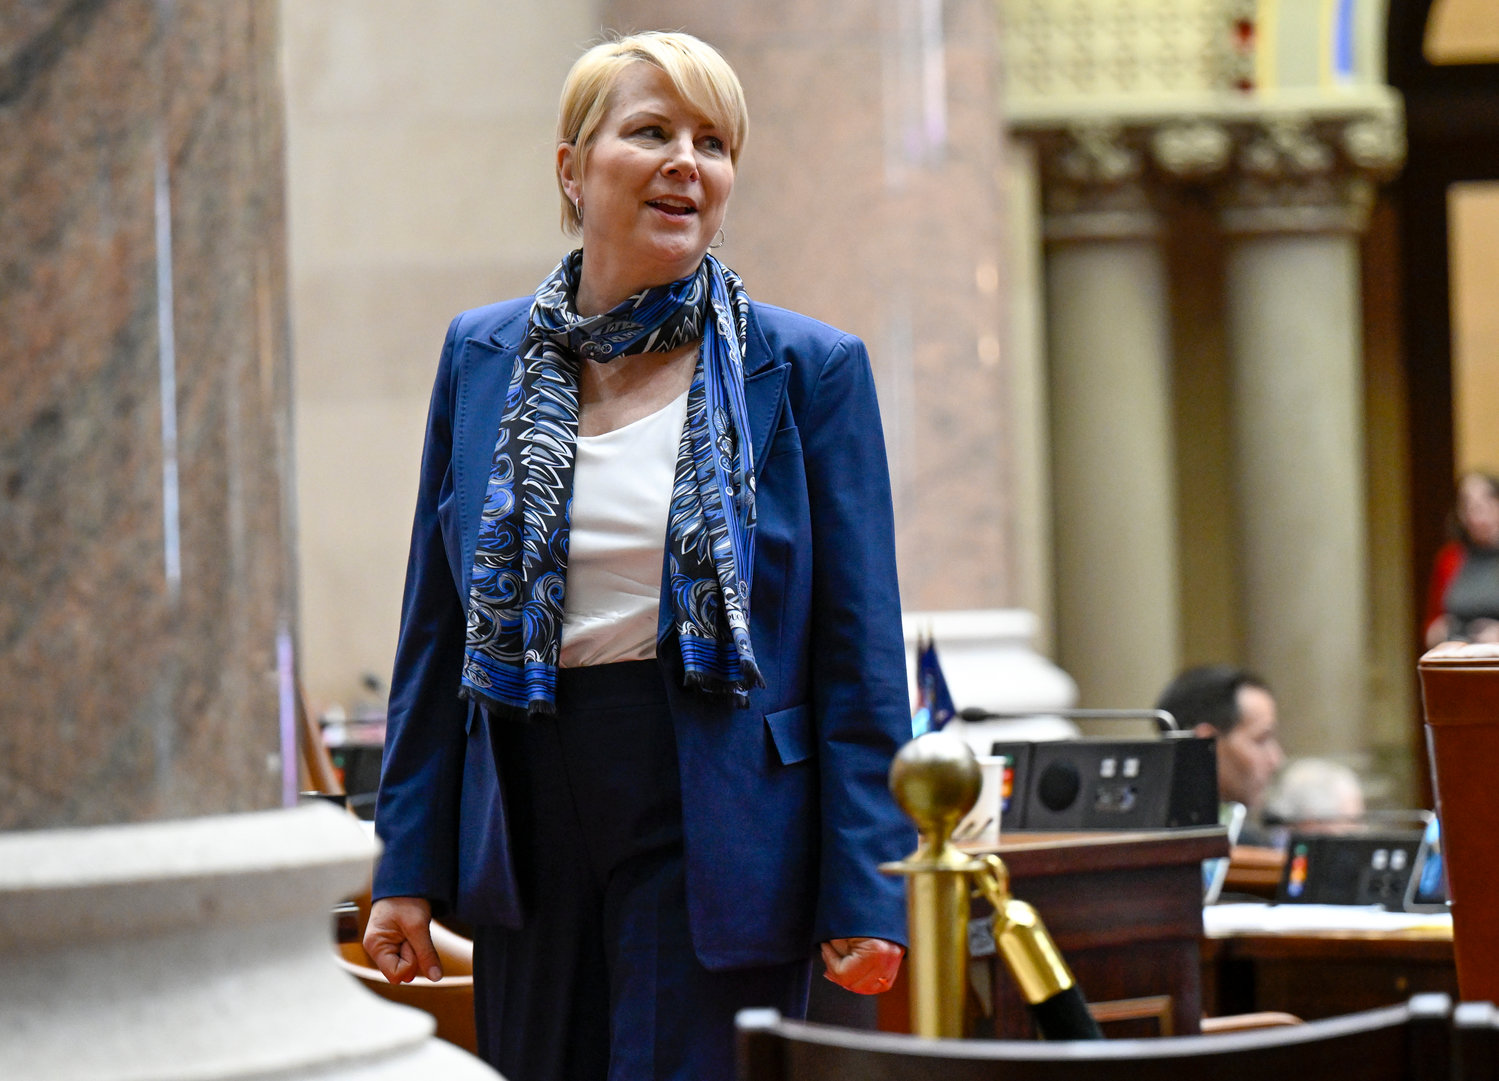 Assemblywoman Mary Beth Walsh, R-Ballston Spa, is seen before debating budget bills during a legislative session in the Assembly Chamber at the state Capitol, Friday, April 8, 2022, in Albany, N.Y. (AP Photo/Hans Pennink)